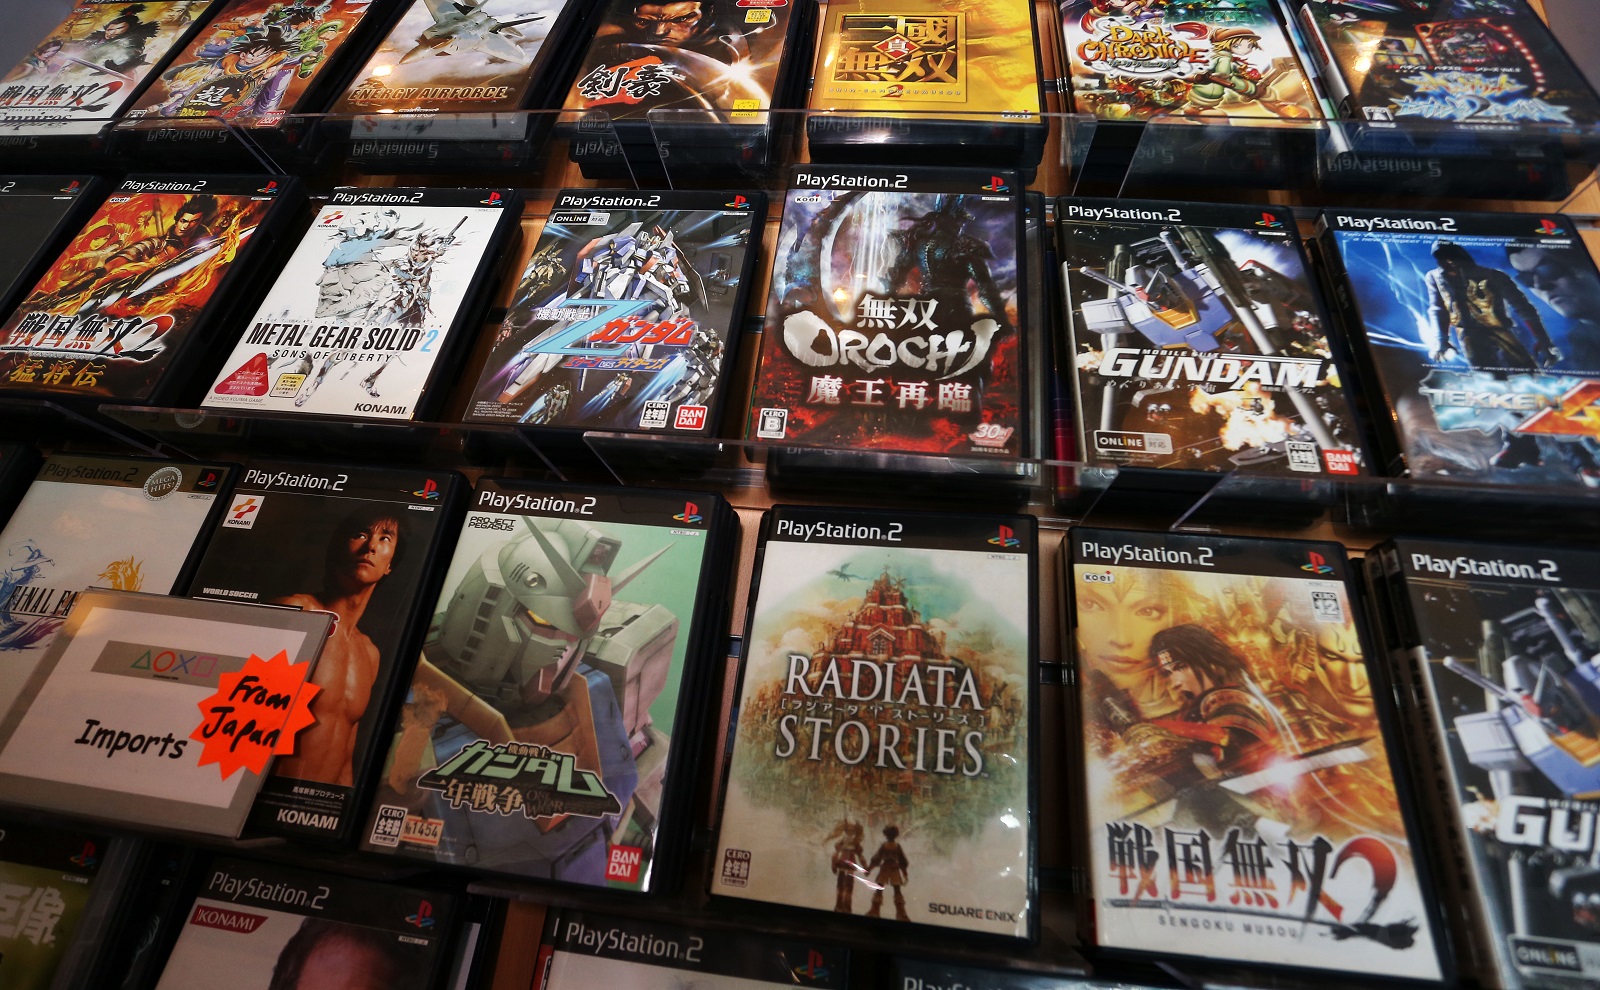 places that sell playstation 2 games